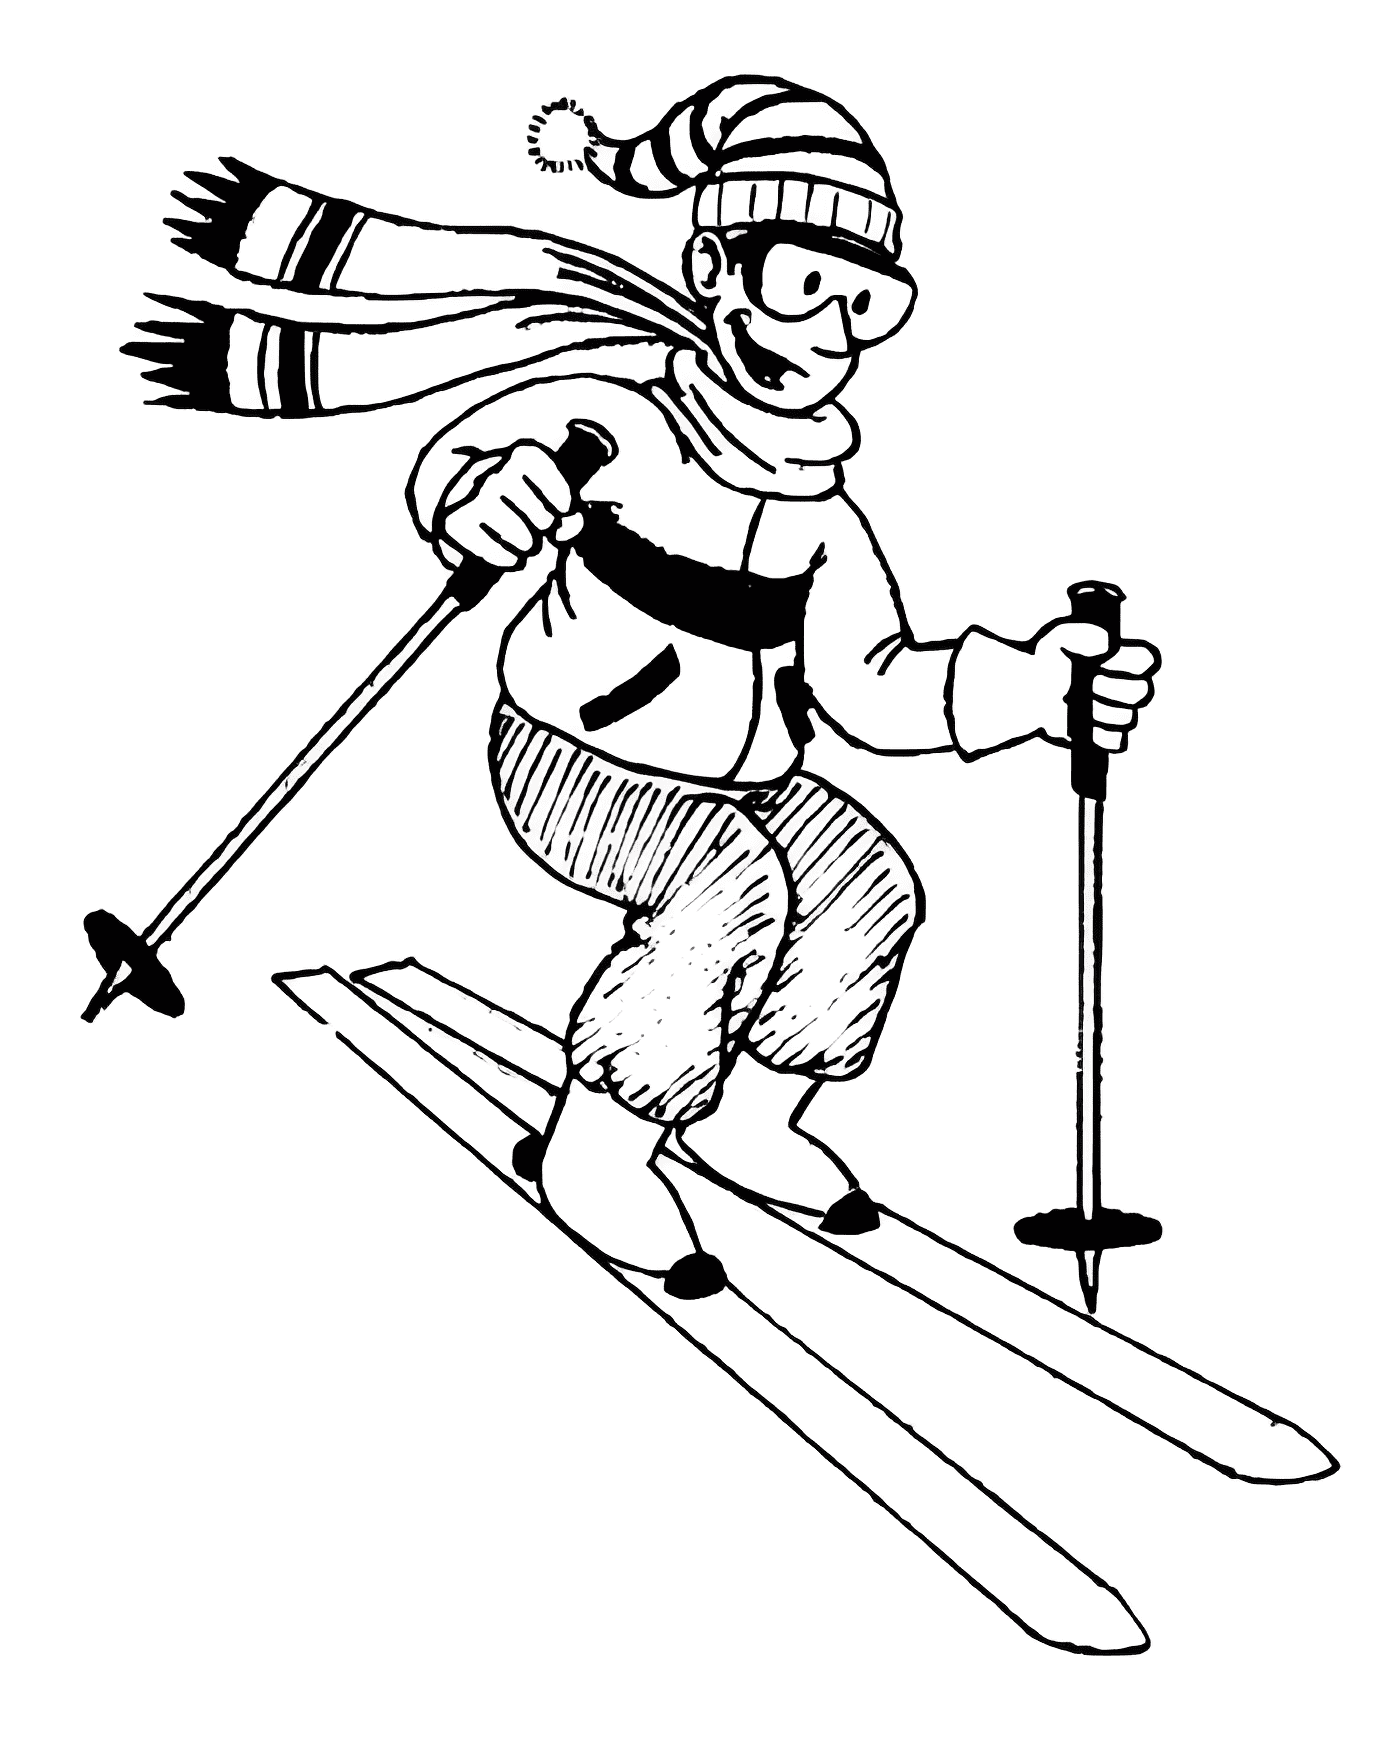 Skiing Clipart Black and White